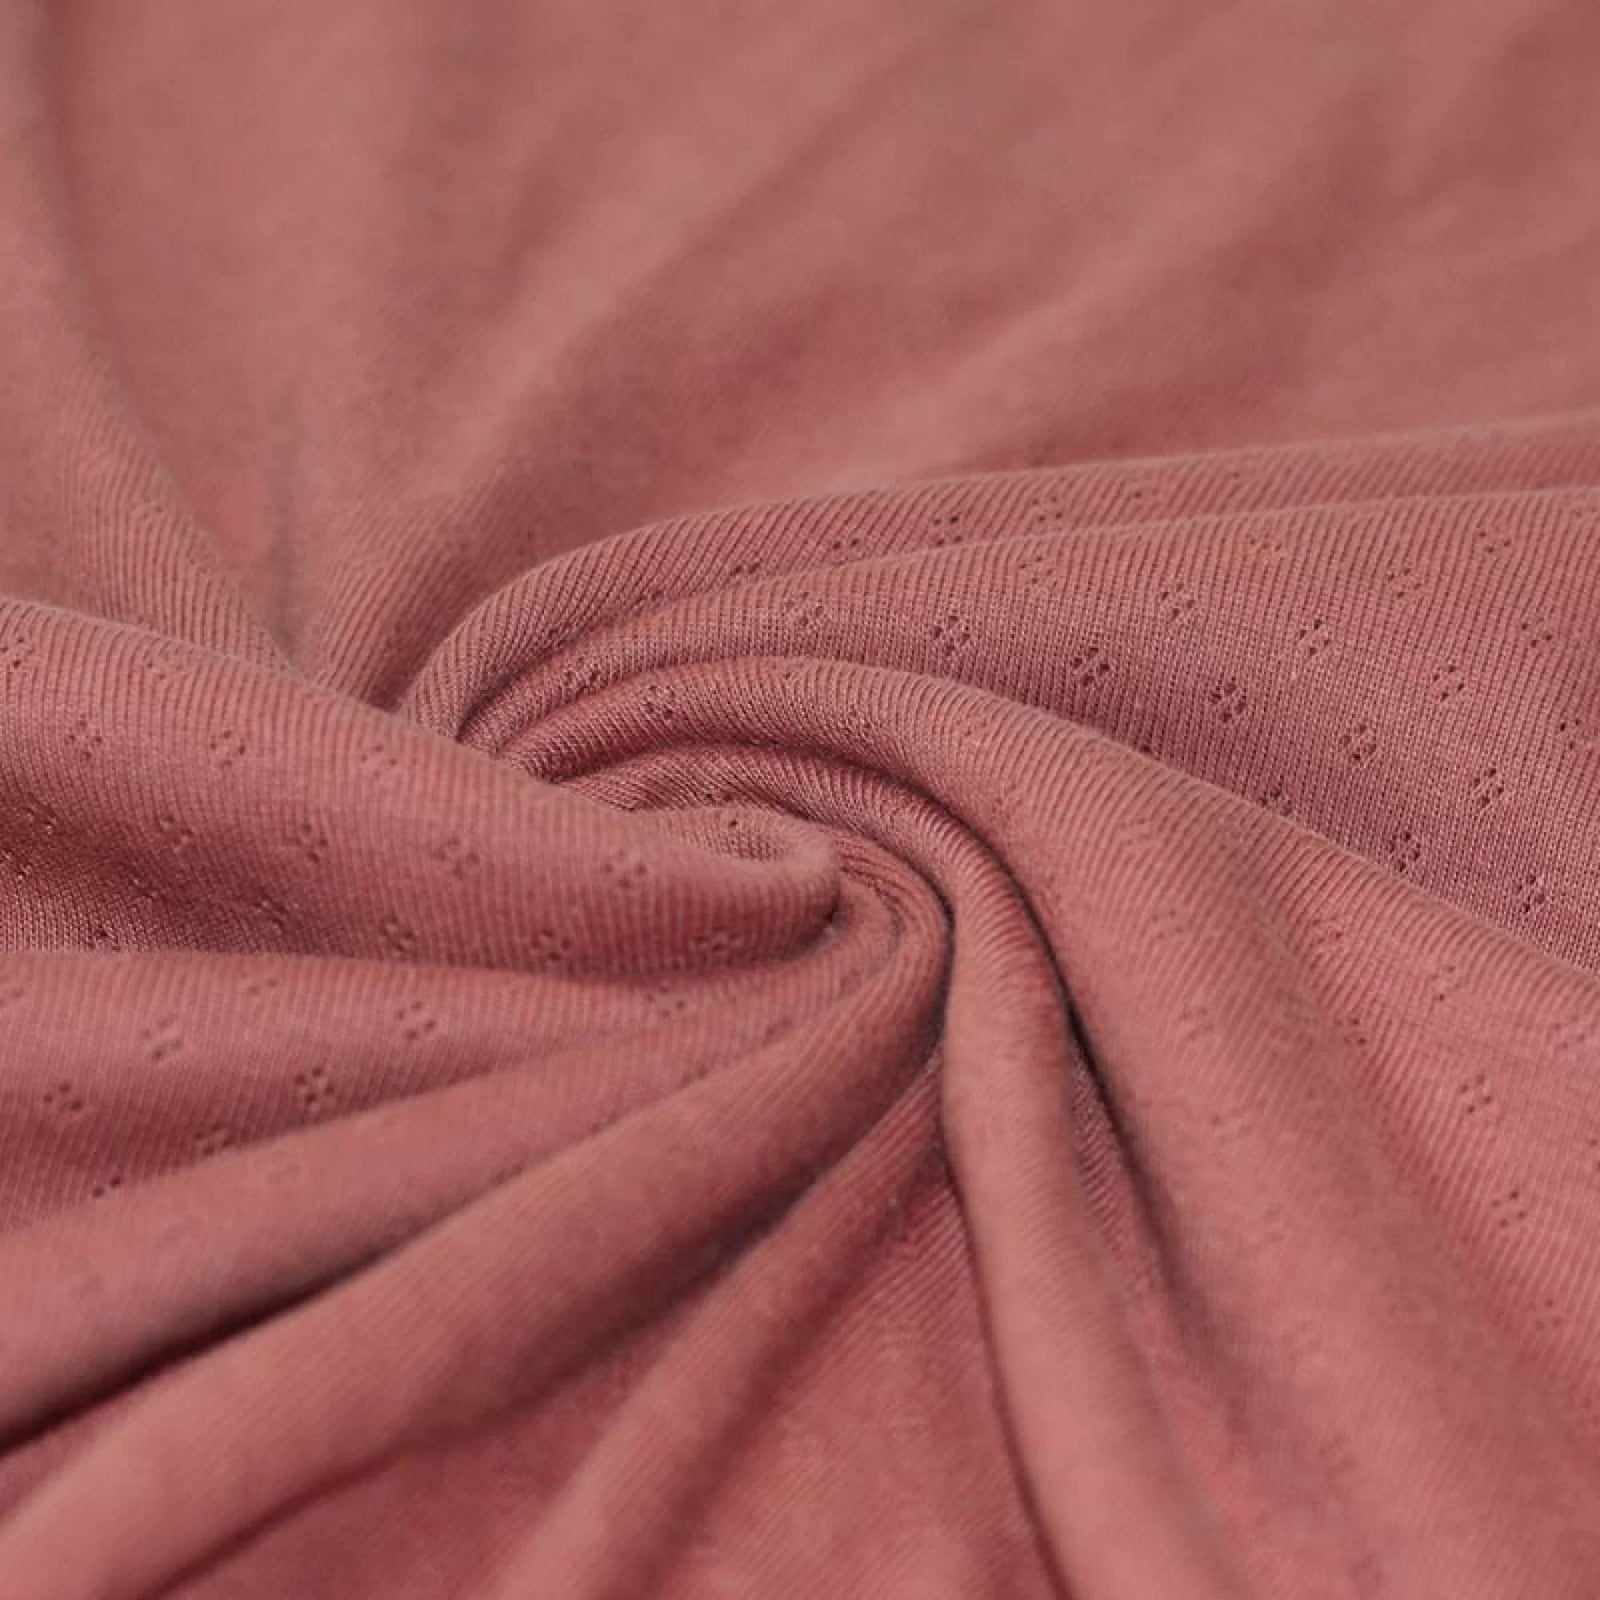 Pointelle Knit - Old Pink - Thread Count Fabrics